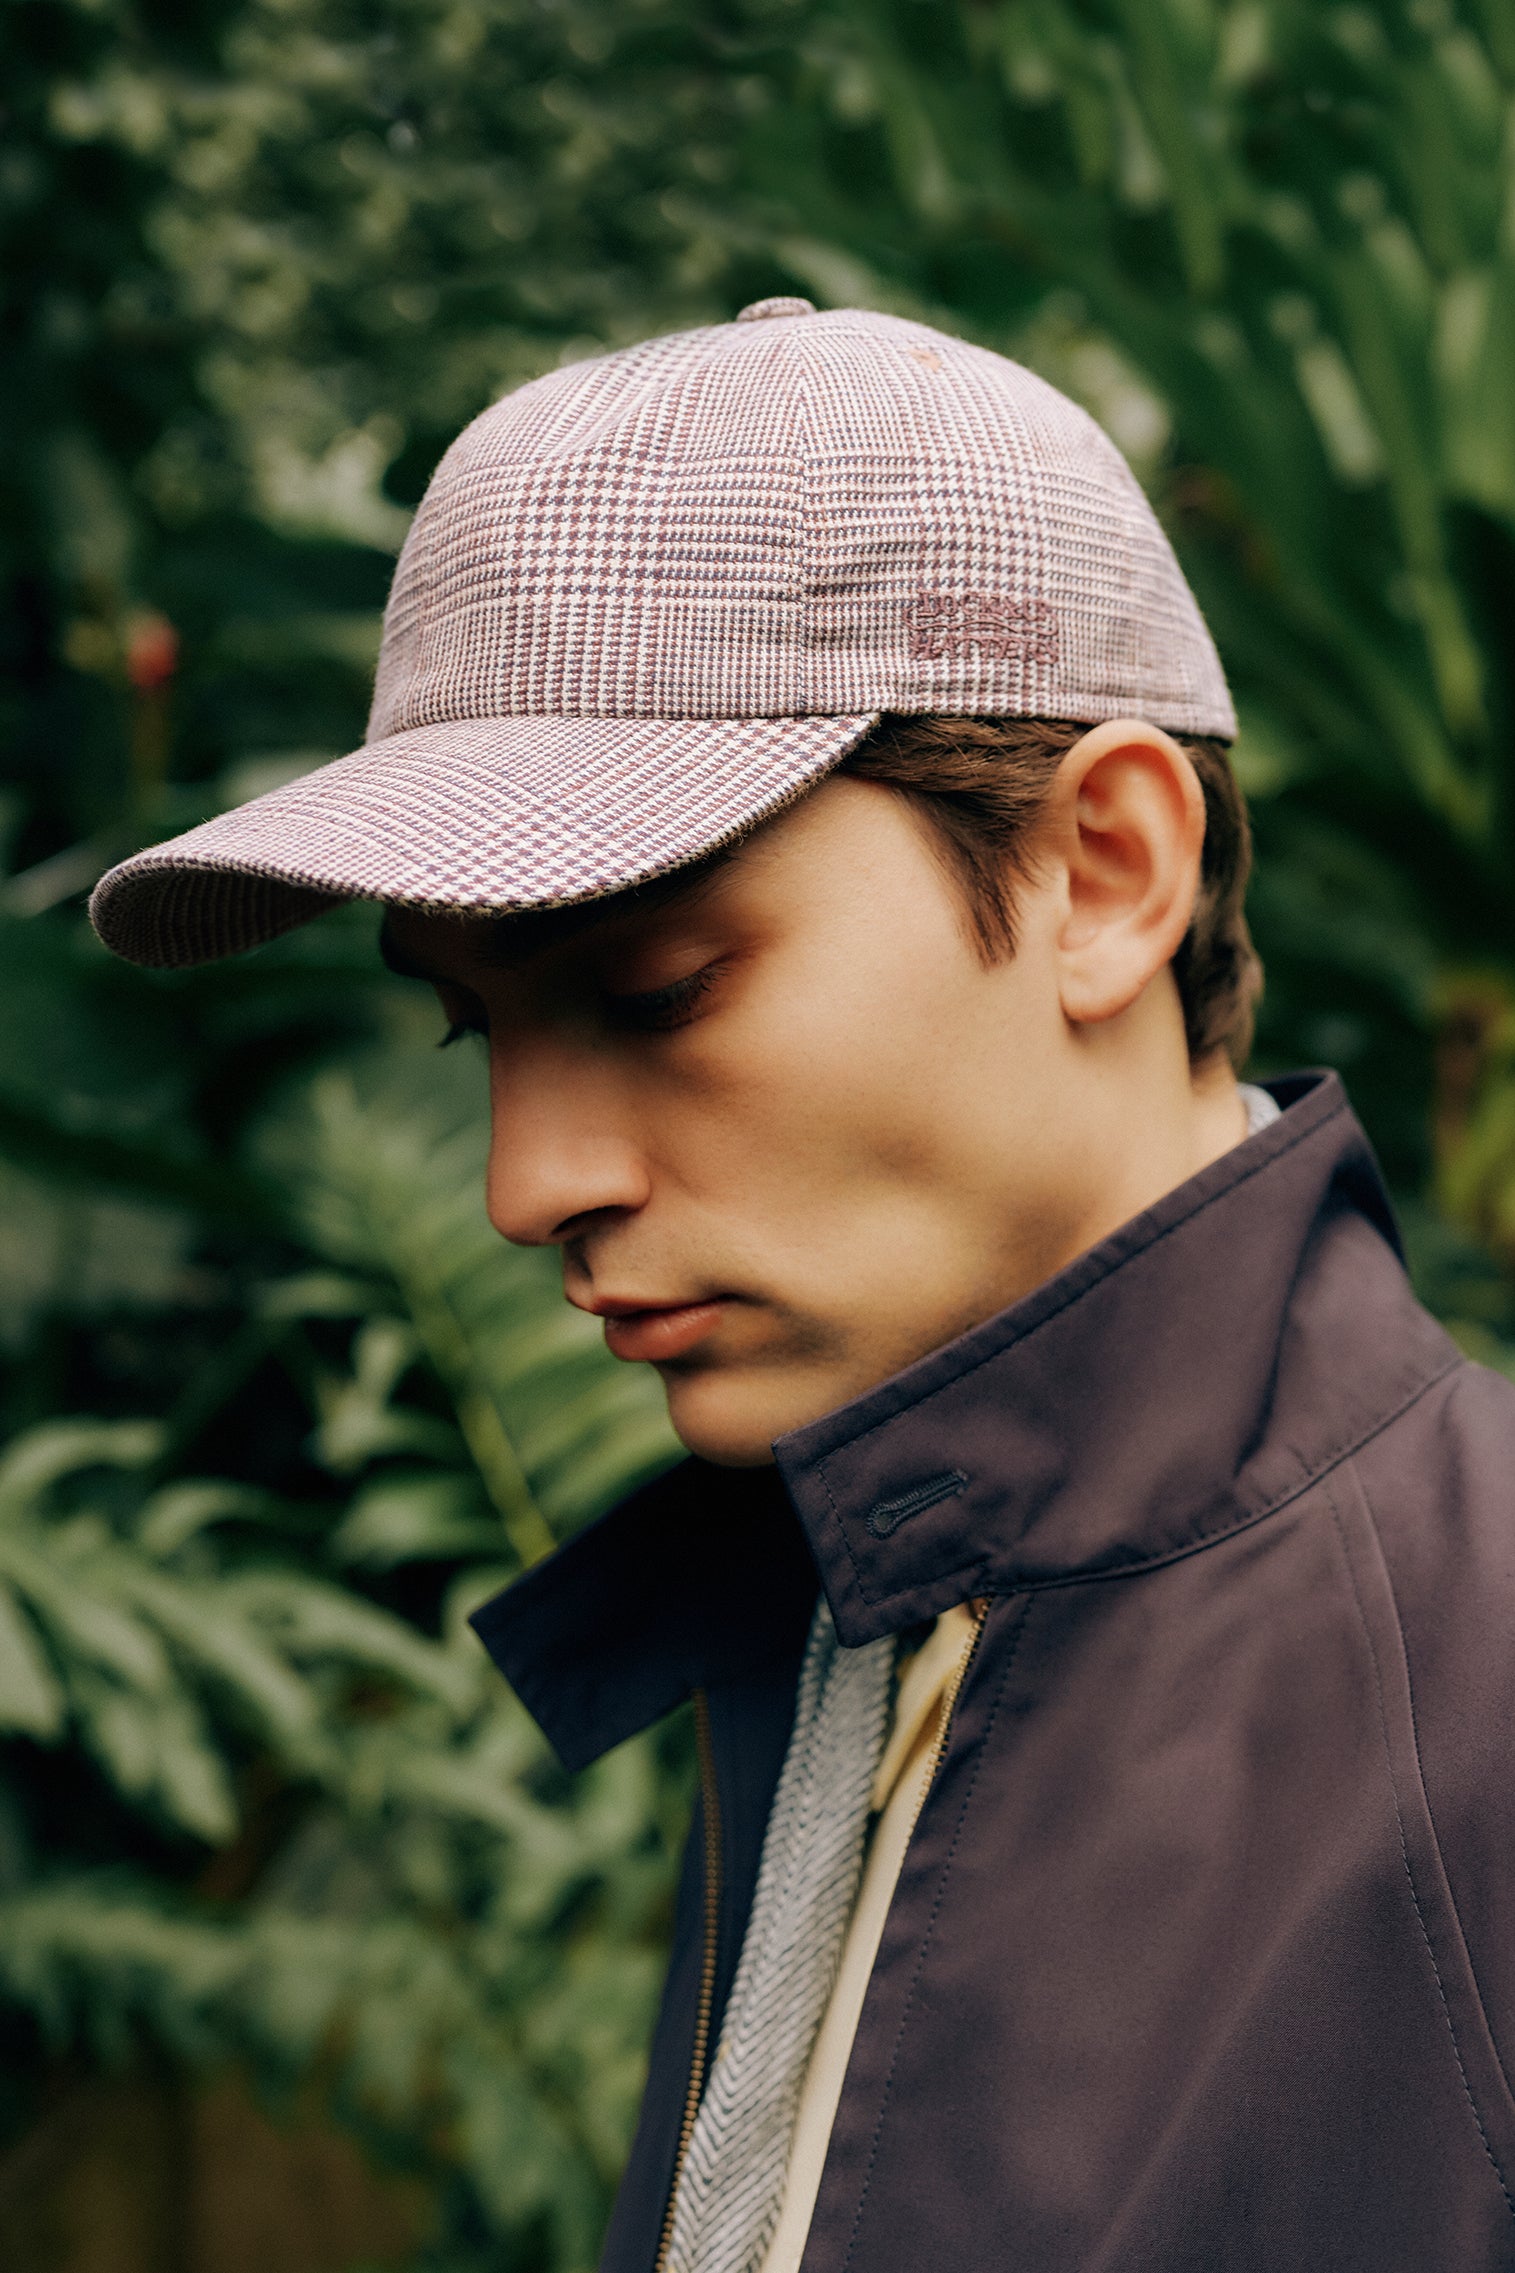 Adjustable Check Baseball Cap - Products - Lock & Co. Hatters London UK